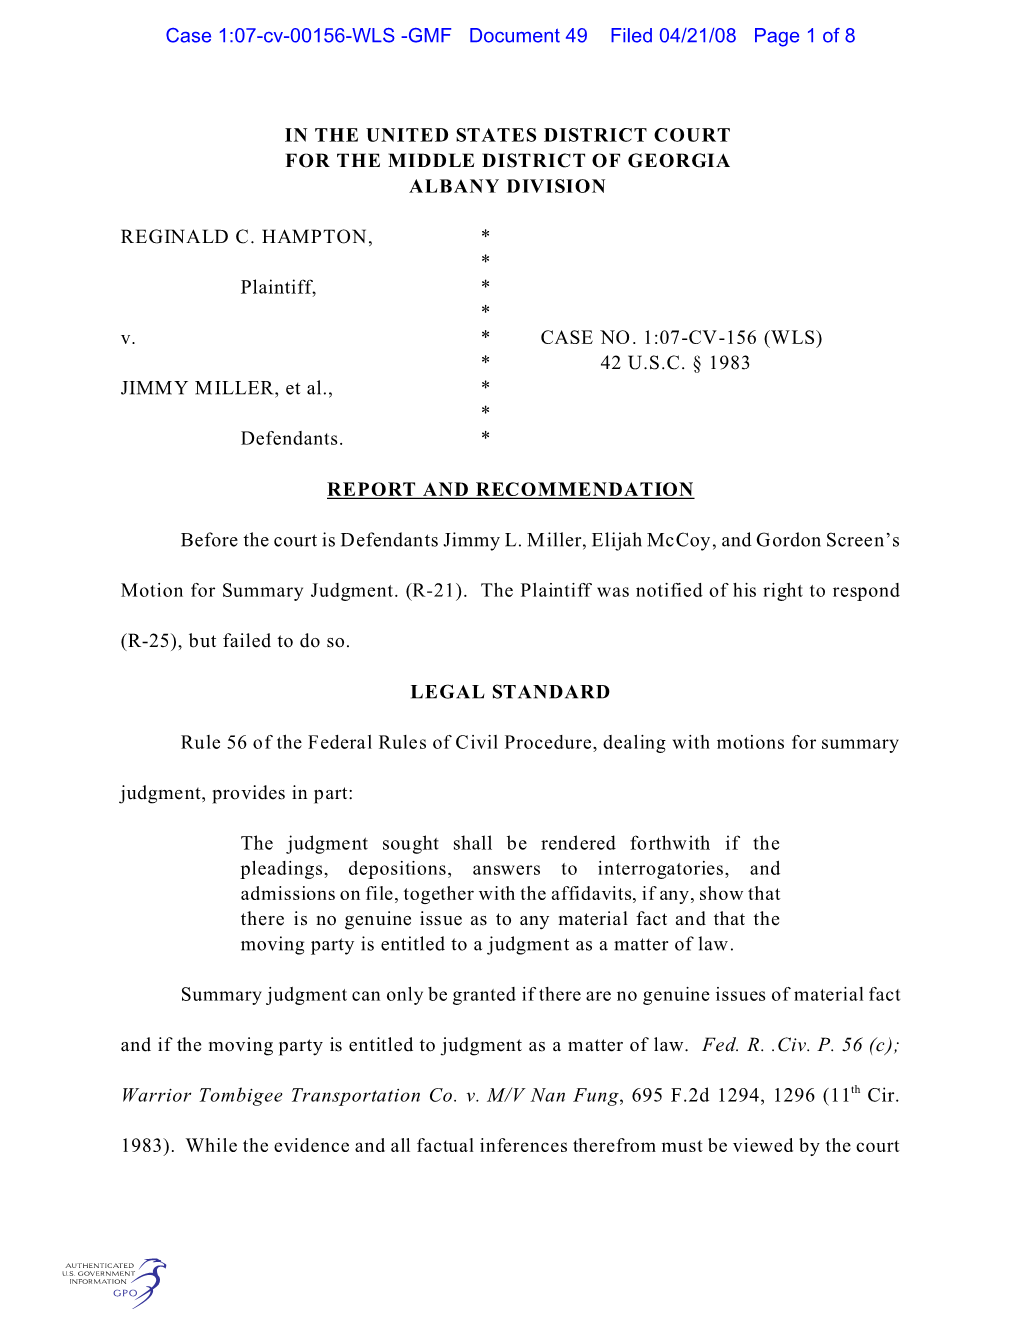 Case 1:07-Cv-00156-WLS -GMF Document 49 Filed 04/21/08 Page 1 of 8